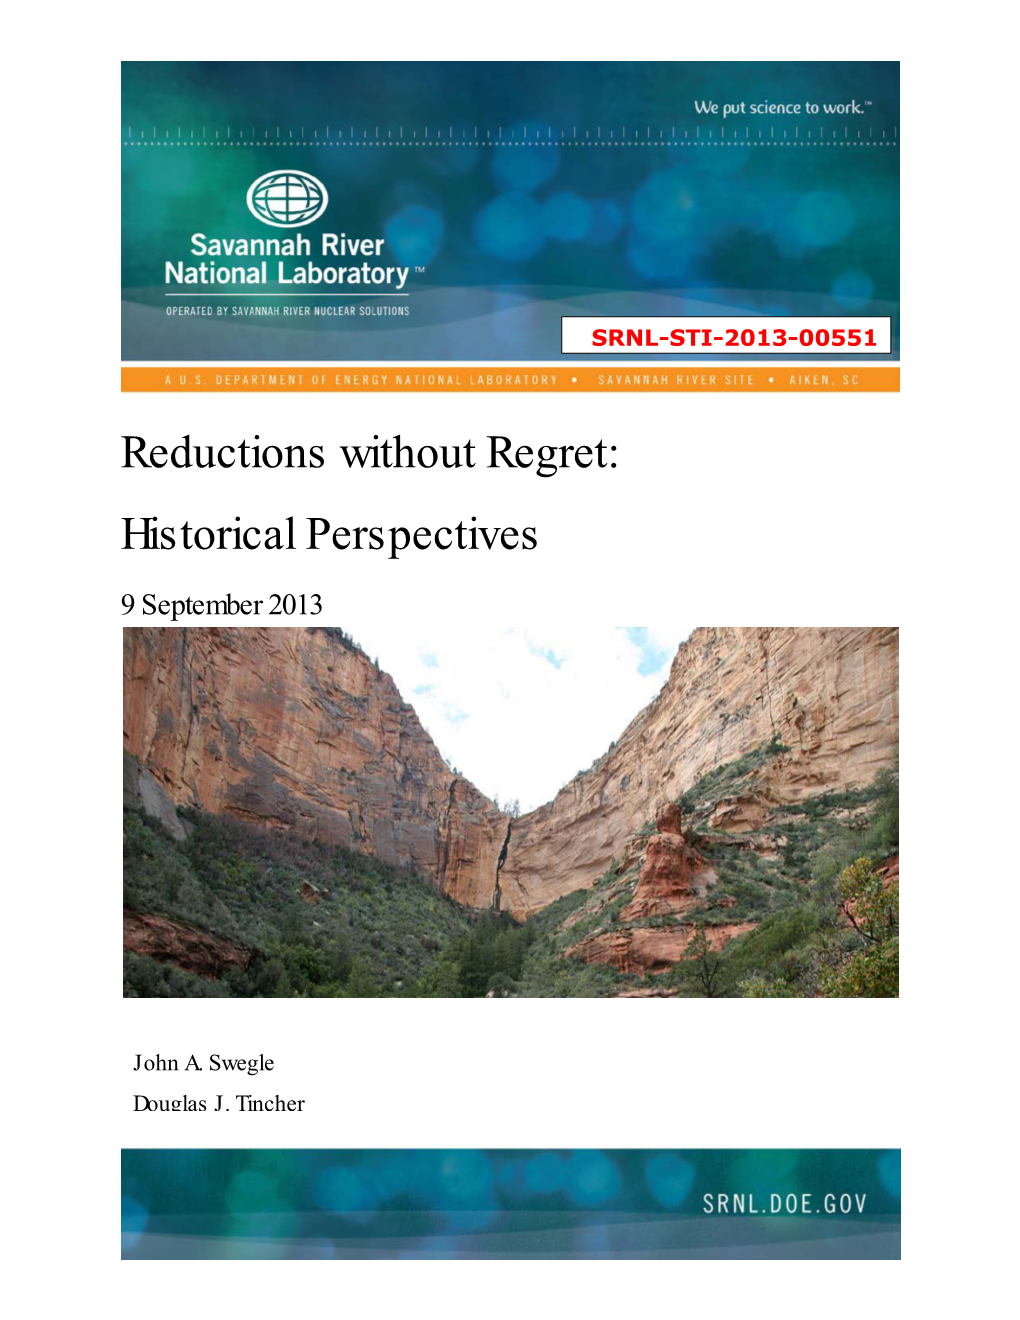 Reductions Without Regret: Historical Perspectives